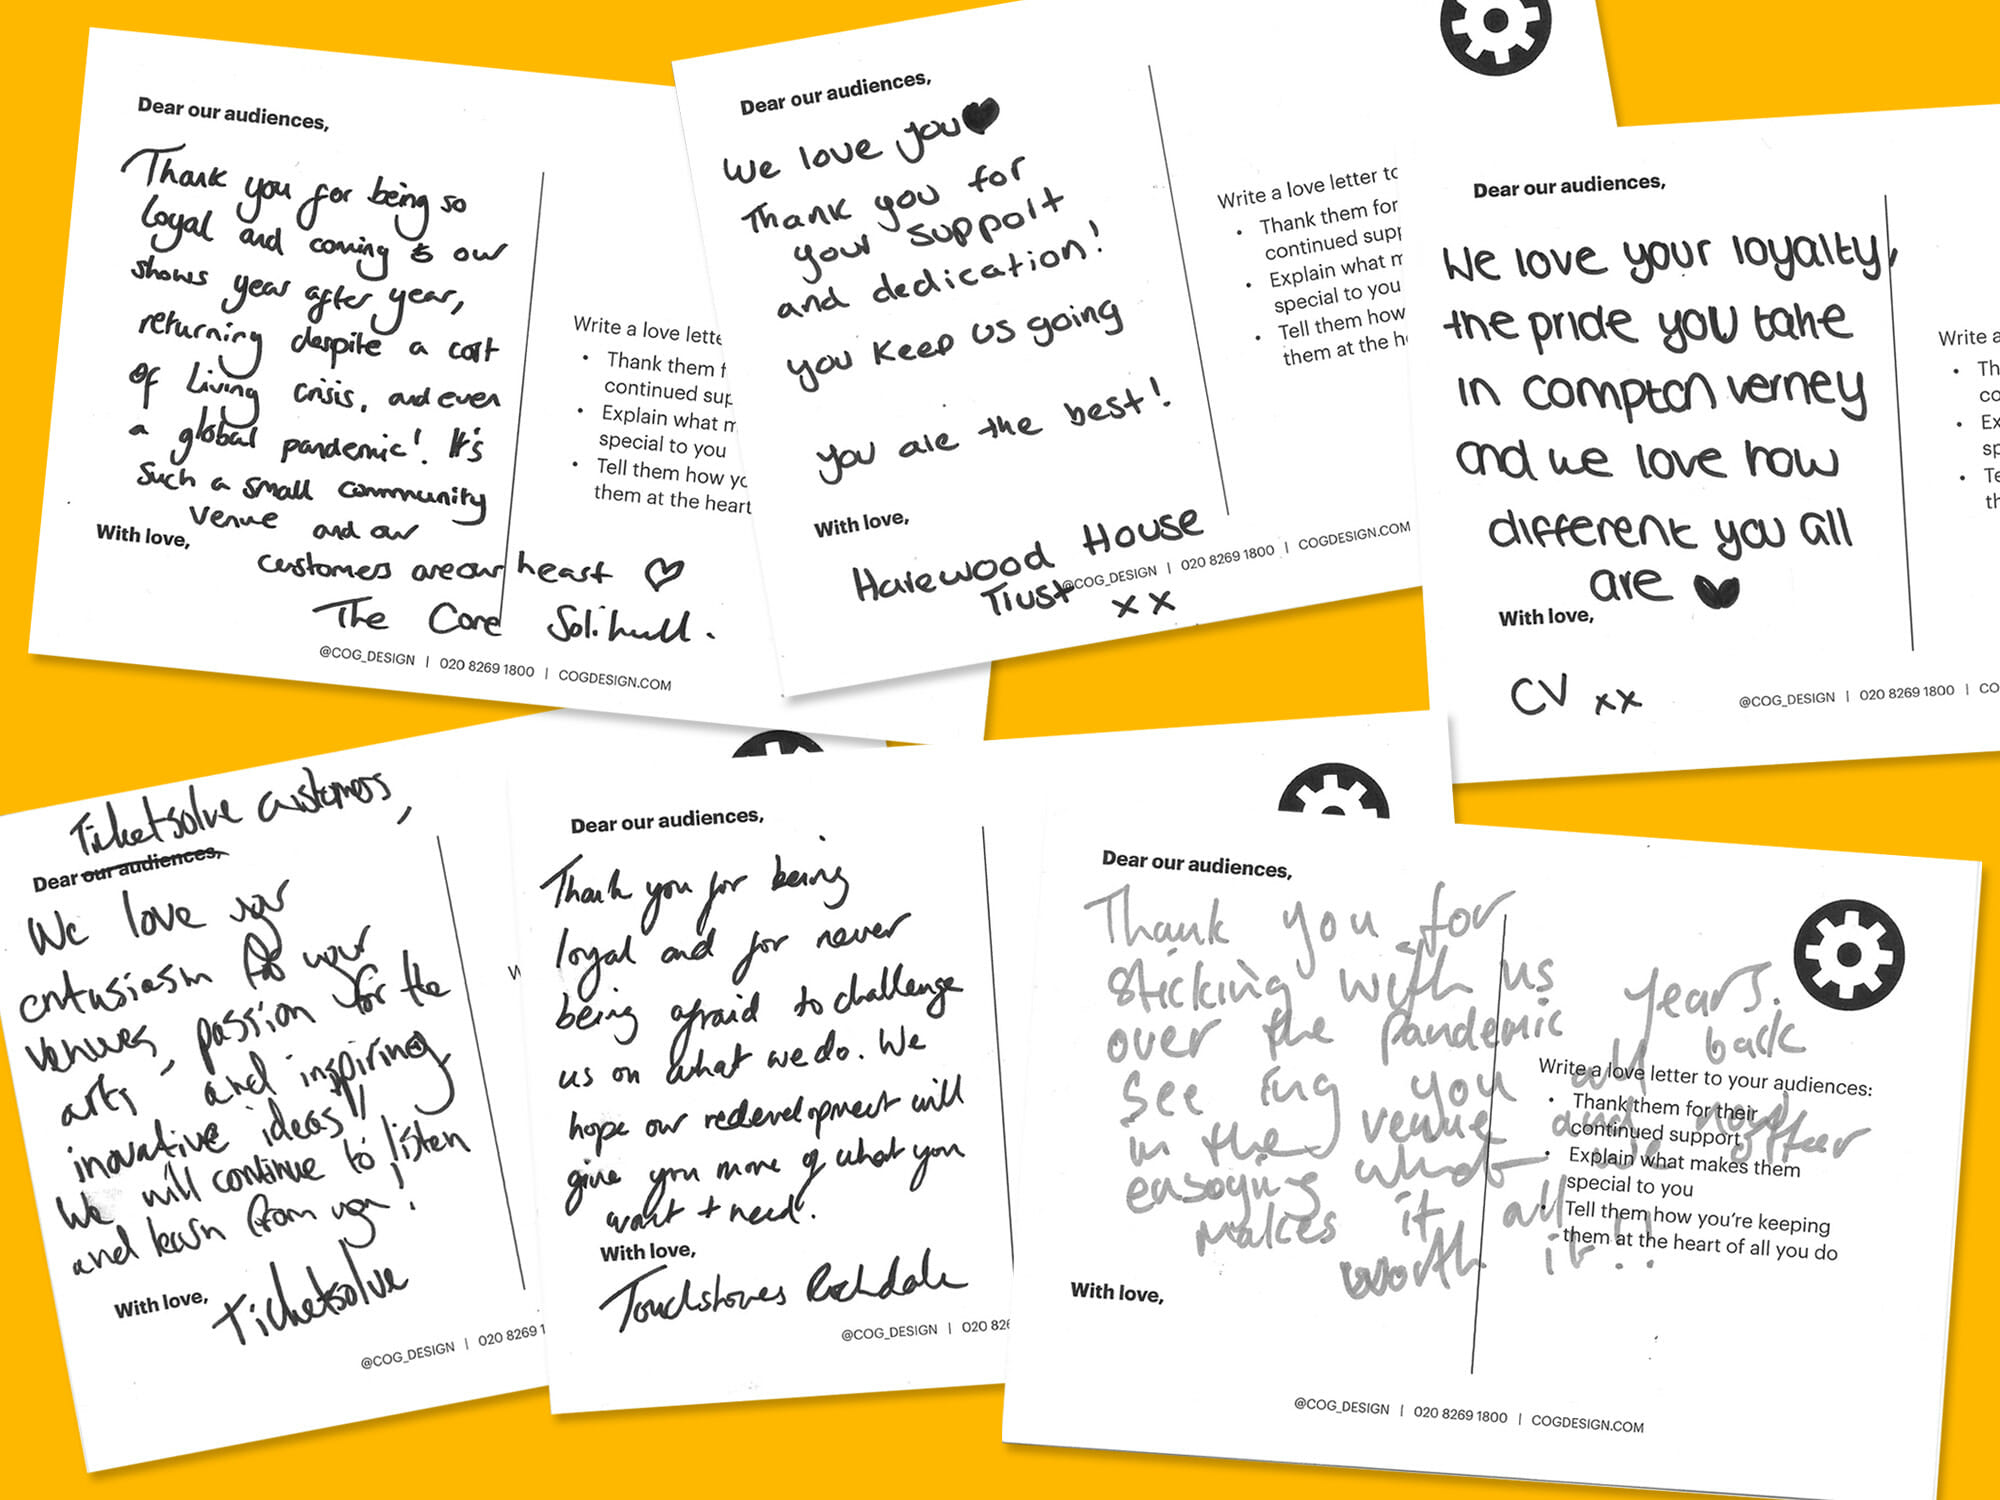 A collage of written postcards are displayed overlapping each other on yellow background. Each postcard has a handwritten message on it.